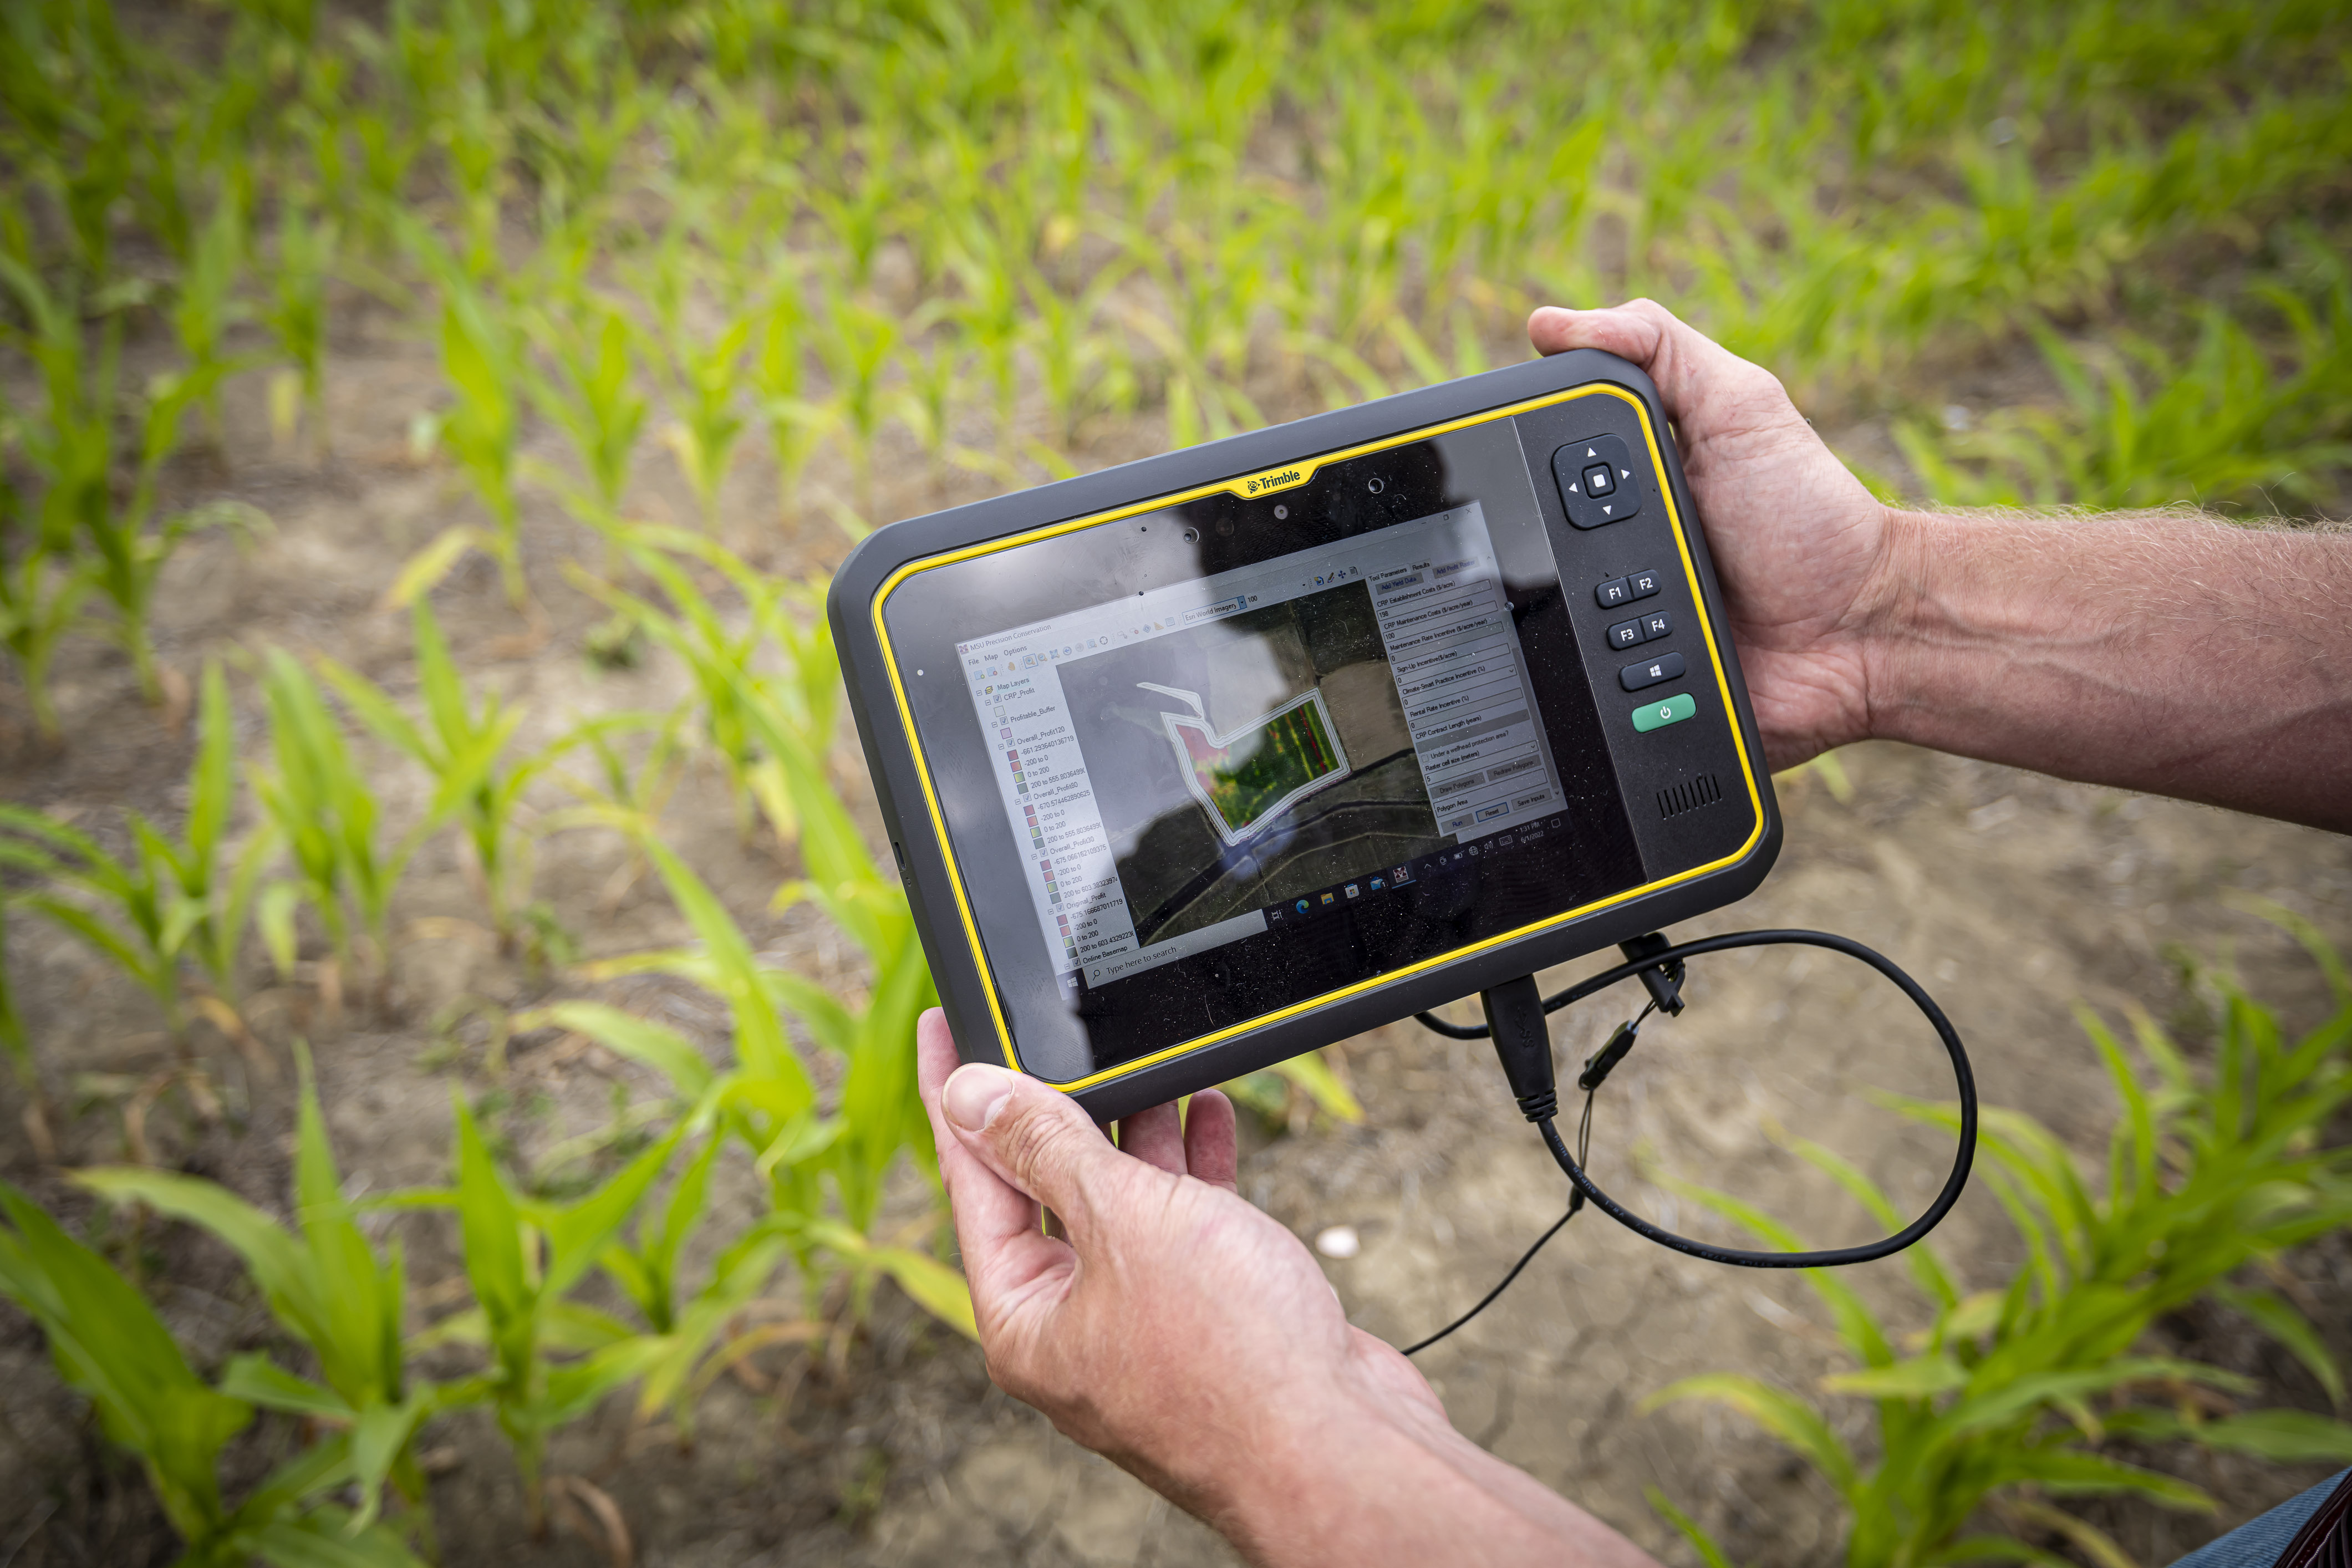 The software, MSU Precision Conservation Tool, identifies precise locations where conservation practices are most economically beneficial to farmers on specific tracts of land. (Photo by David Ammon)